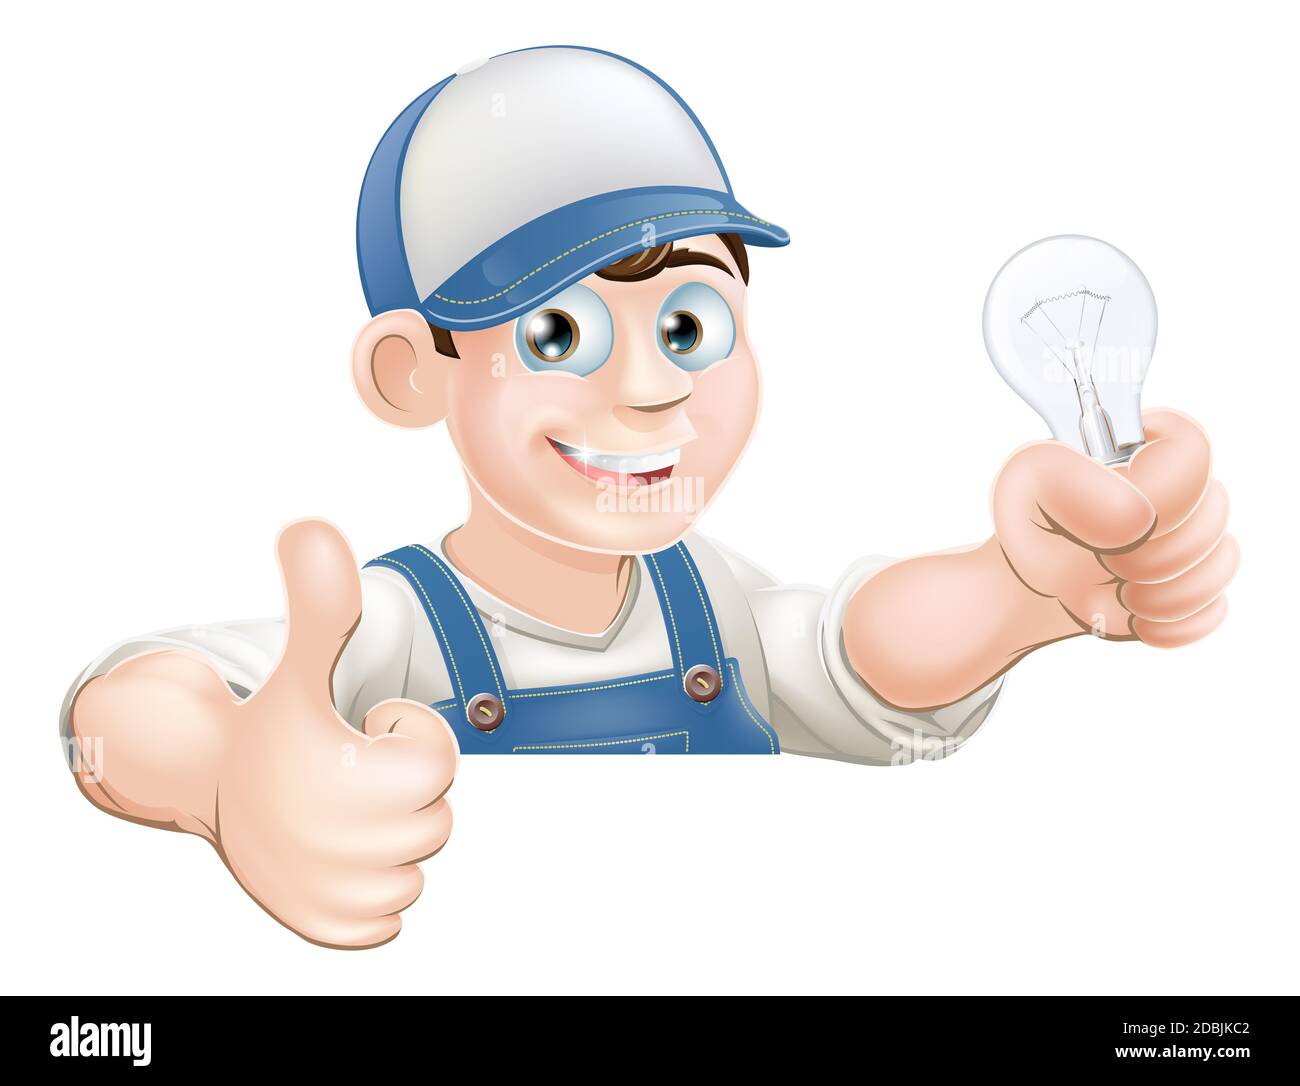 An illustration of a cartoon electrician giving a thumbs up and holding a light bulb Stock Photo